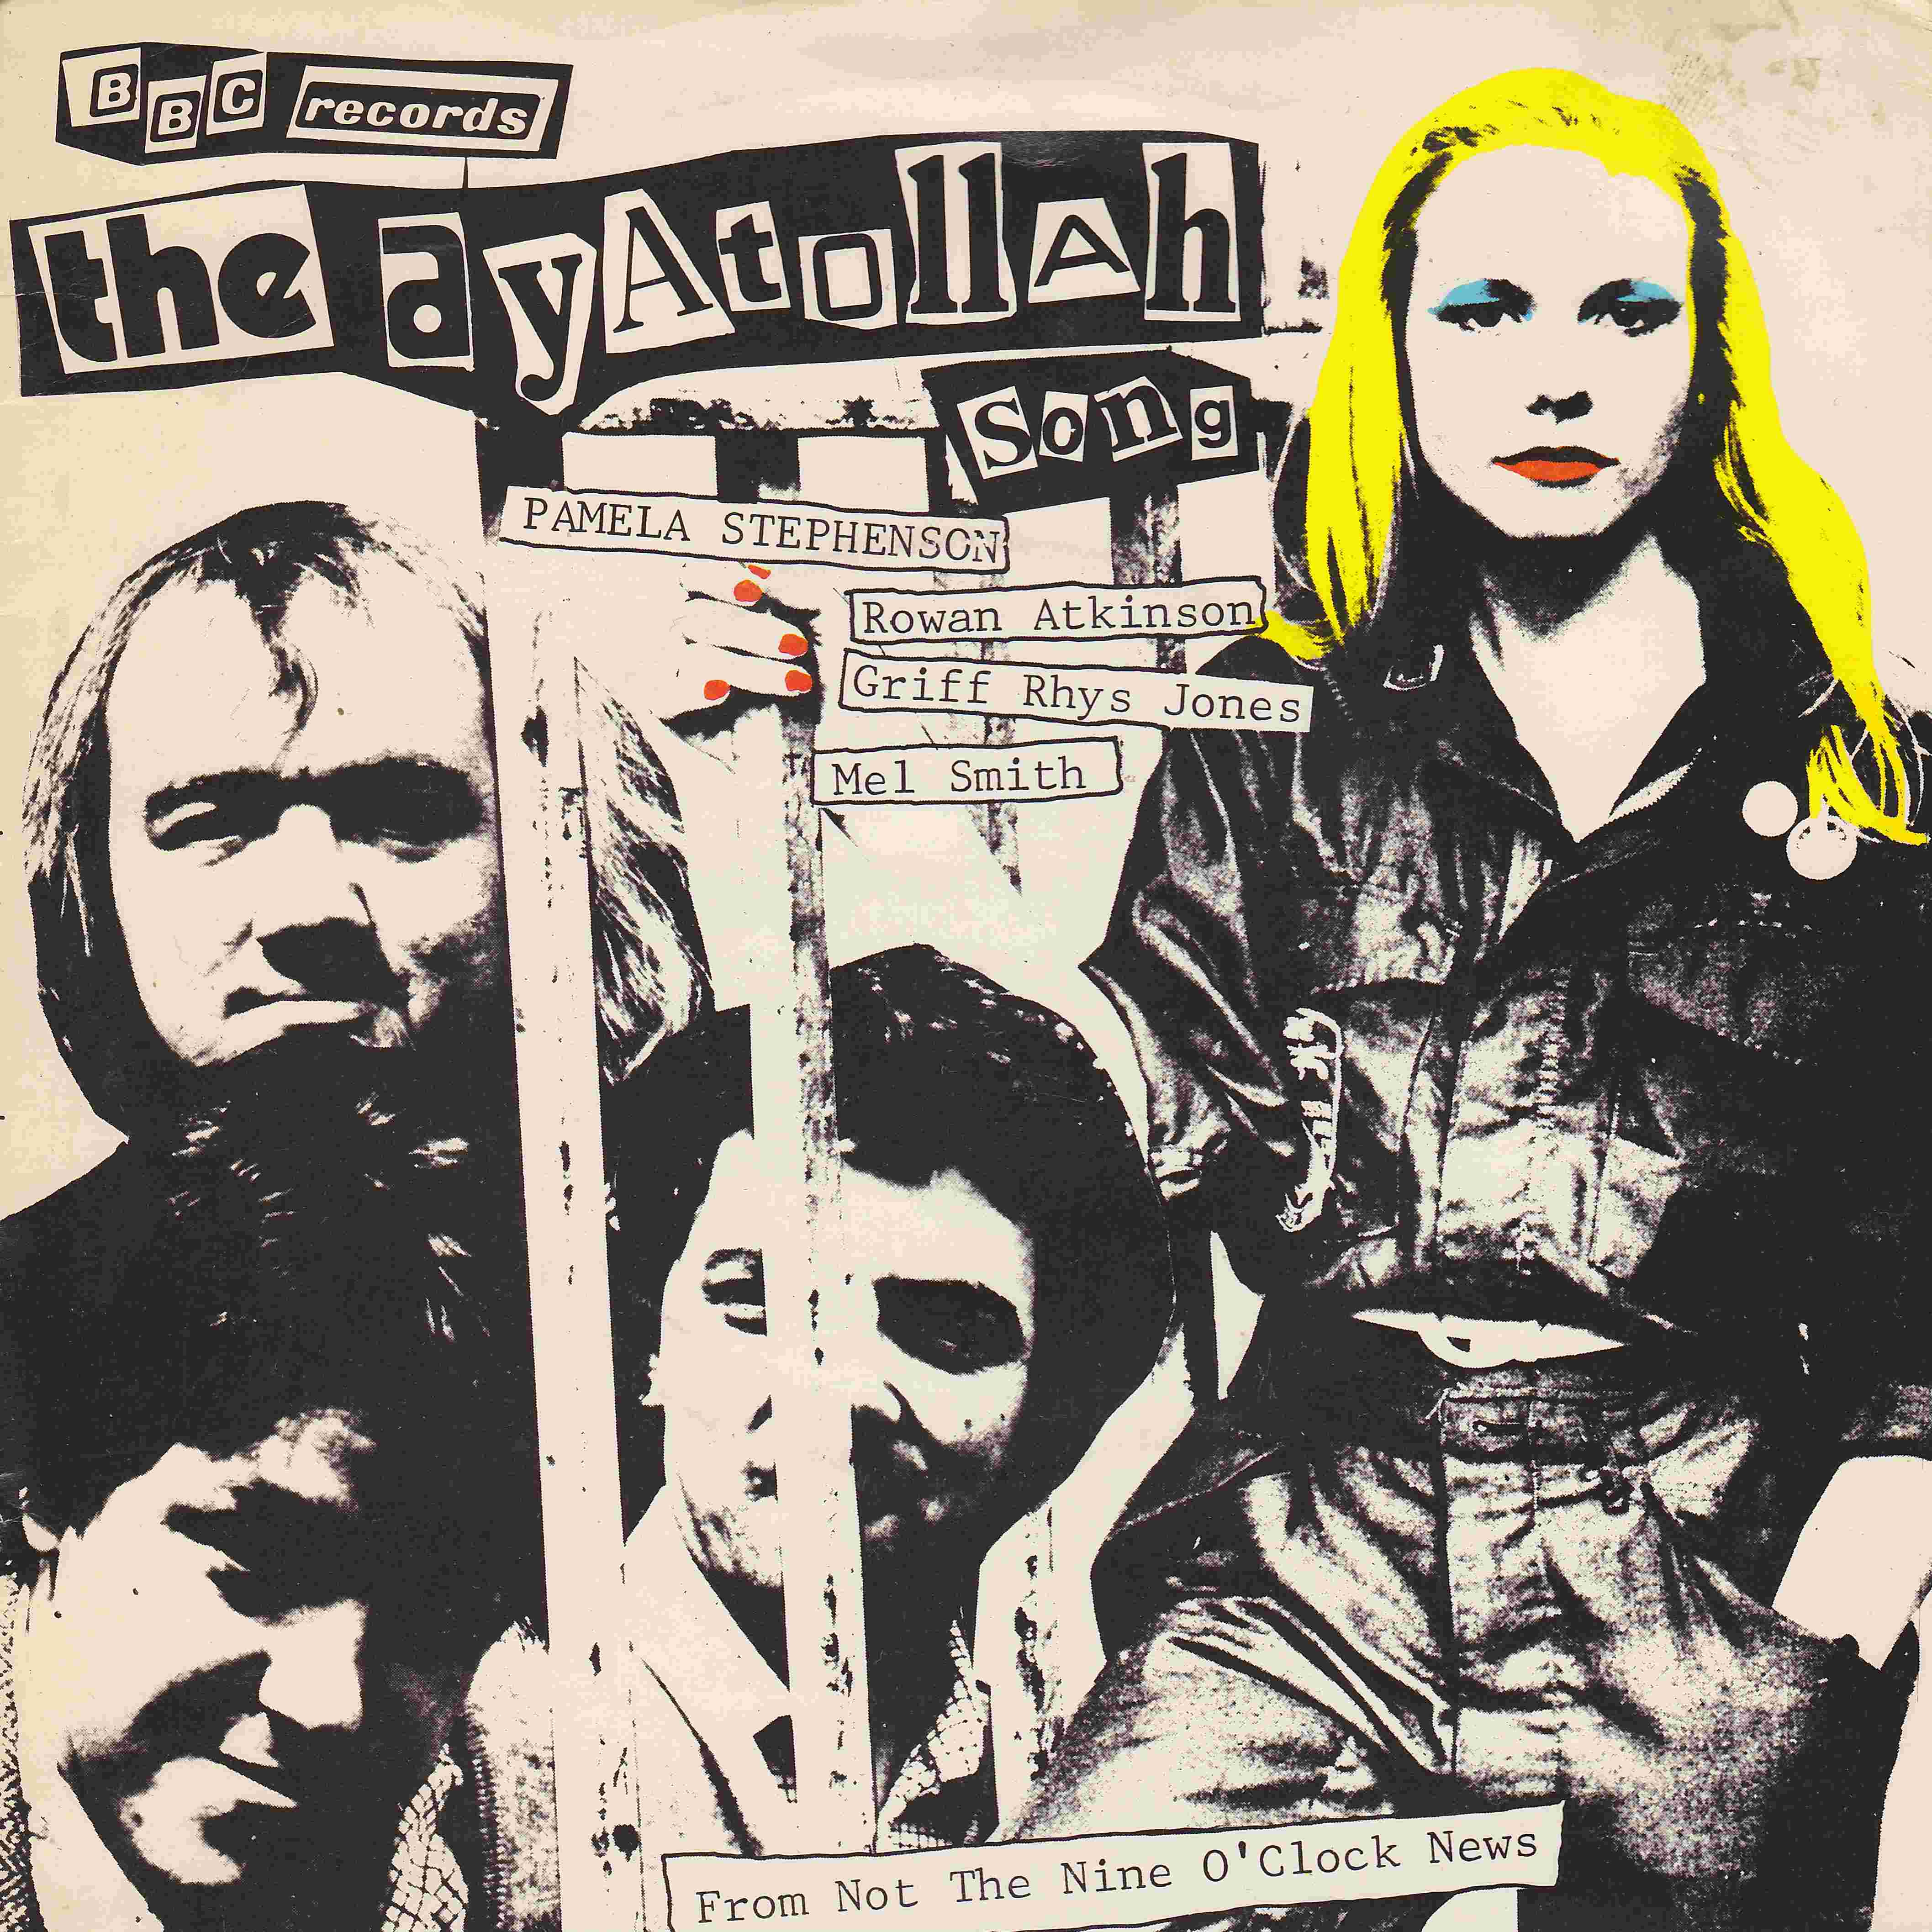 Picture of RESL 88 The Ayatollah song (Not the nine o'clock news) by artist Curtis / Goodall / Smith from the BBC records and Tapes library